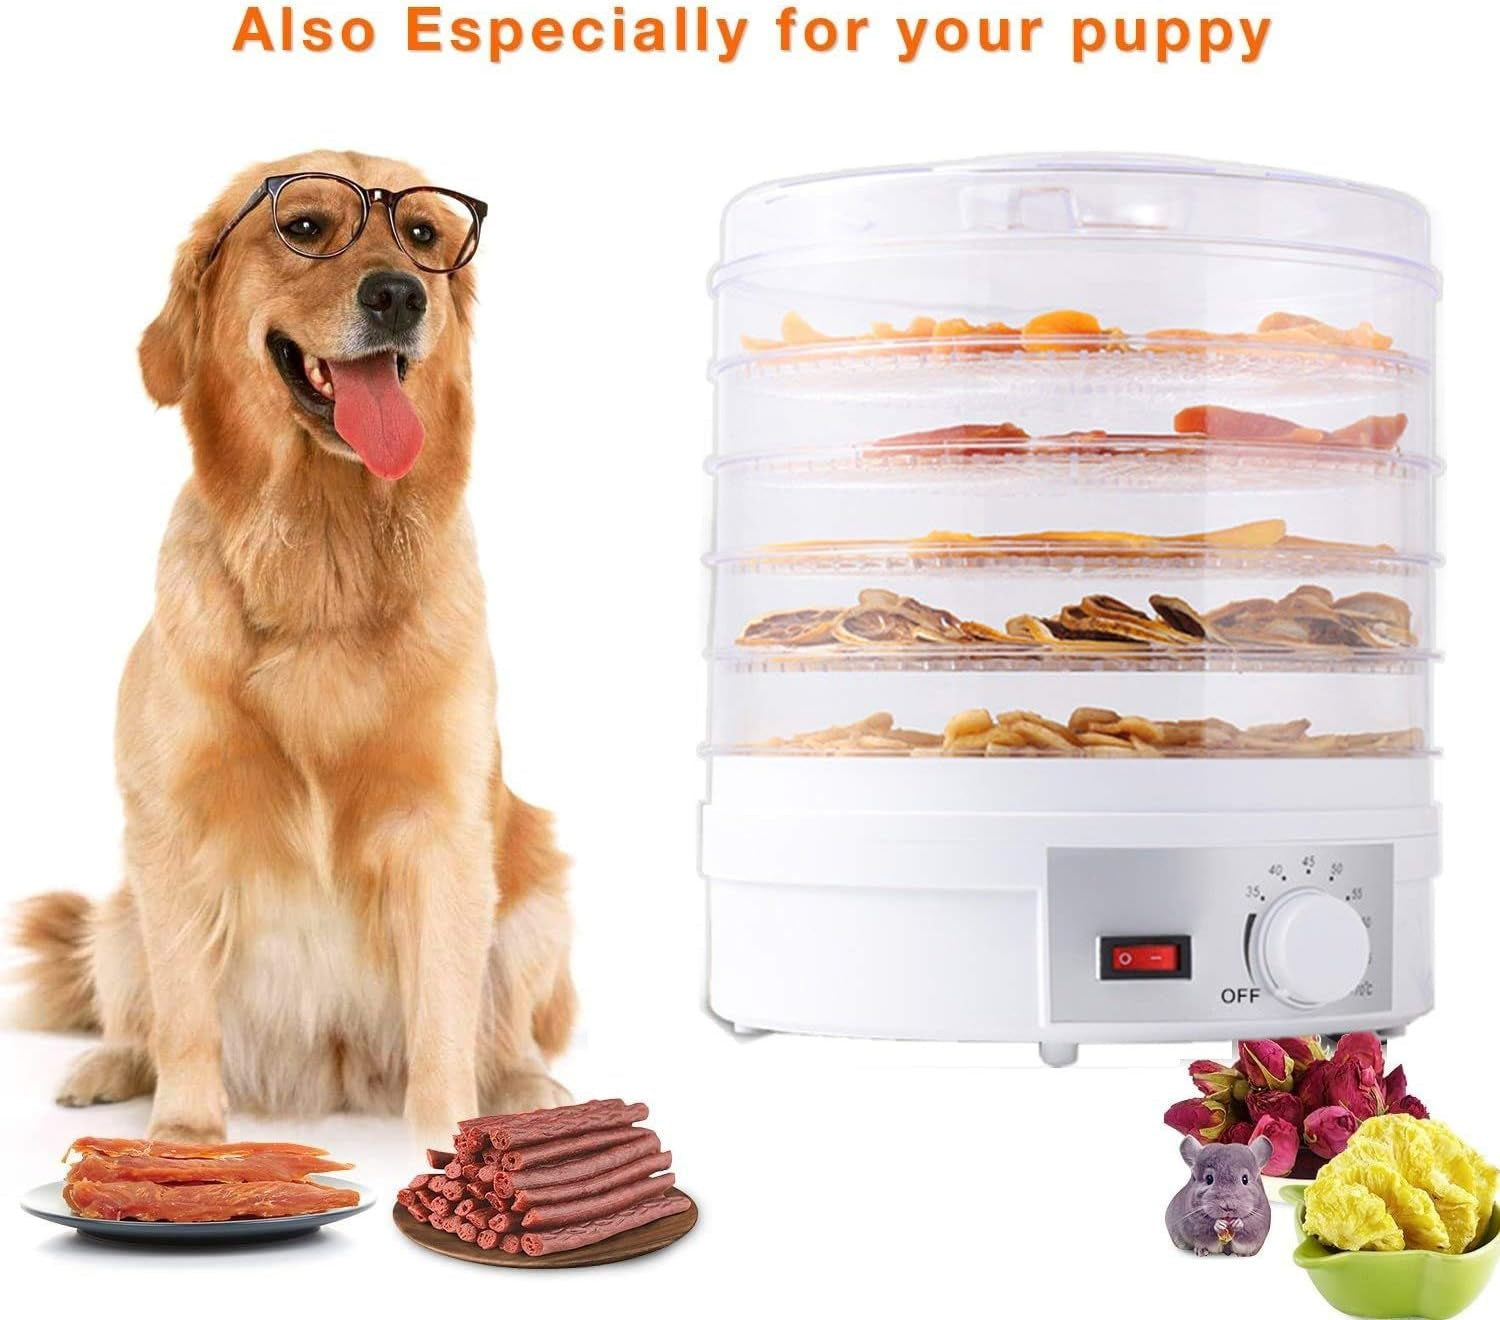 Food Dehydrator|Beef Jerky Maker|Five Tray Food Dehydration Machine with Knob Button|Dried Fruits and Vegetables Maker